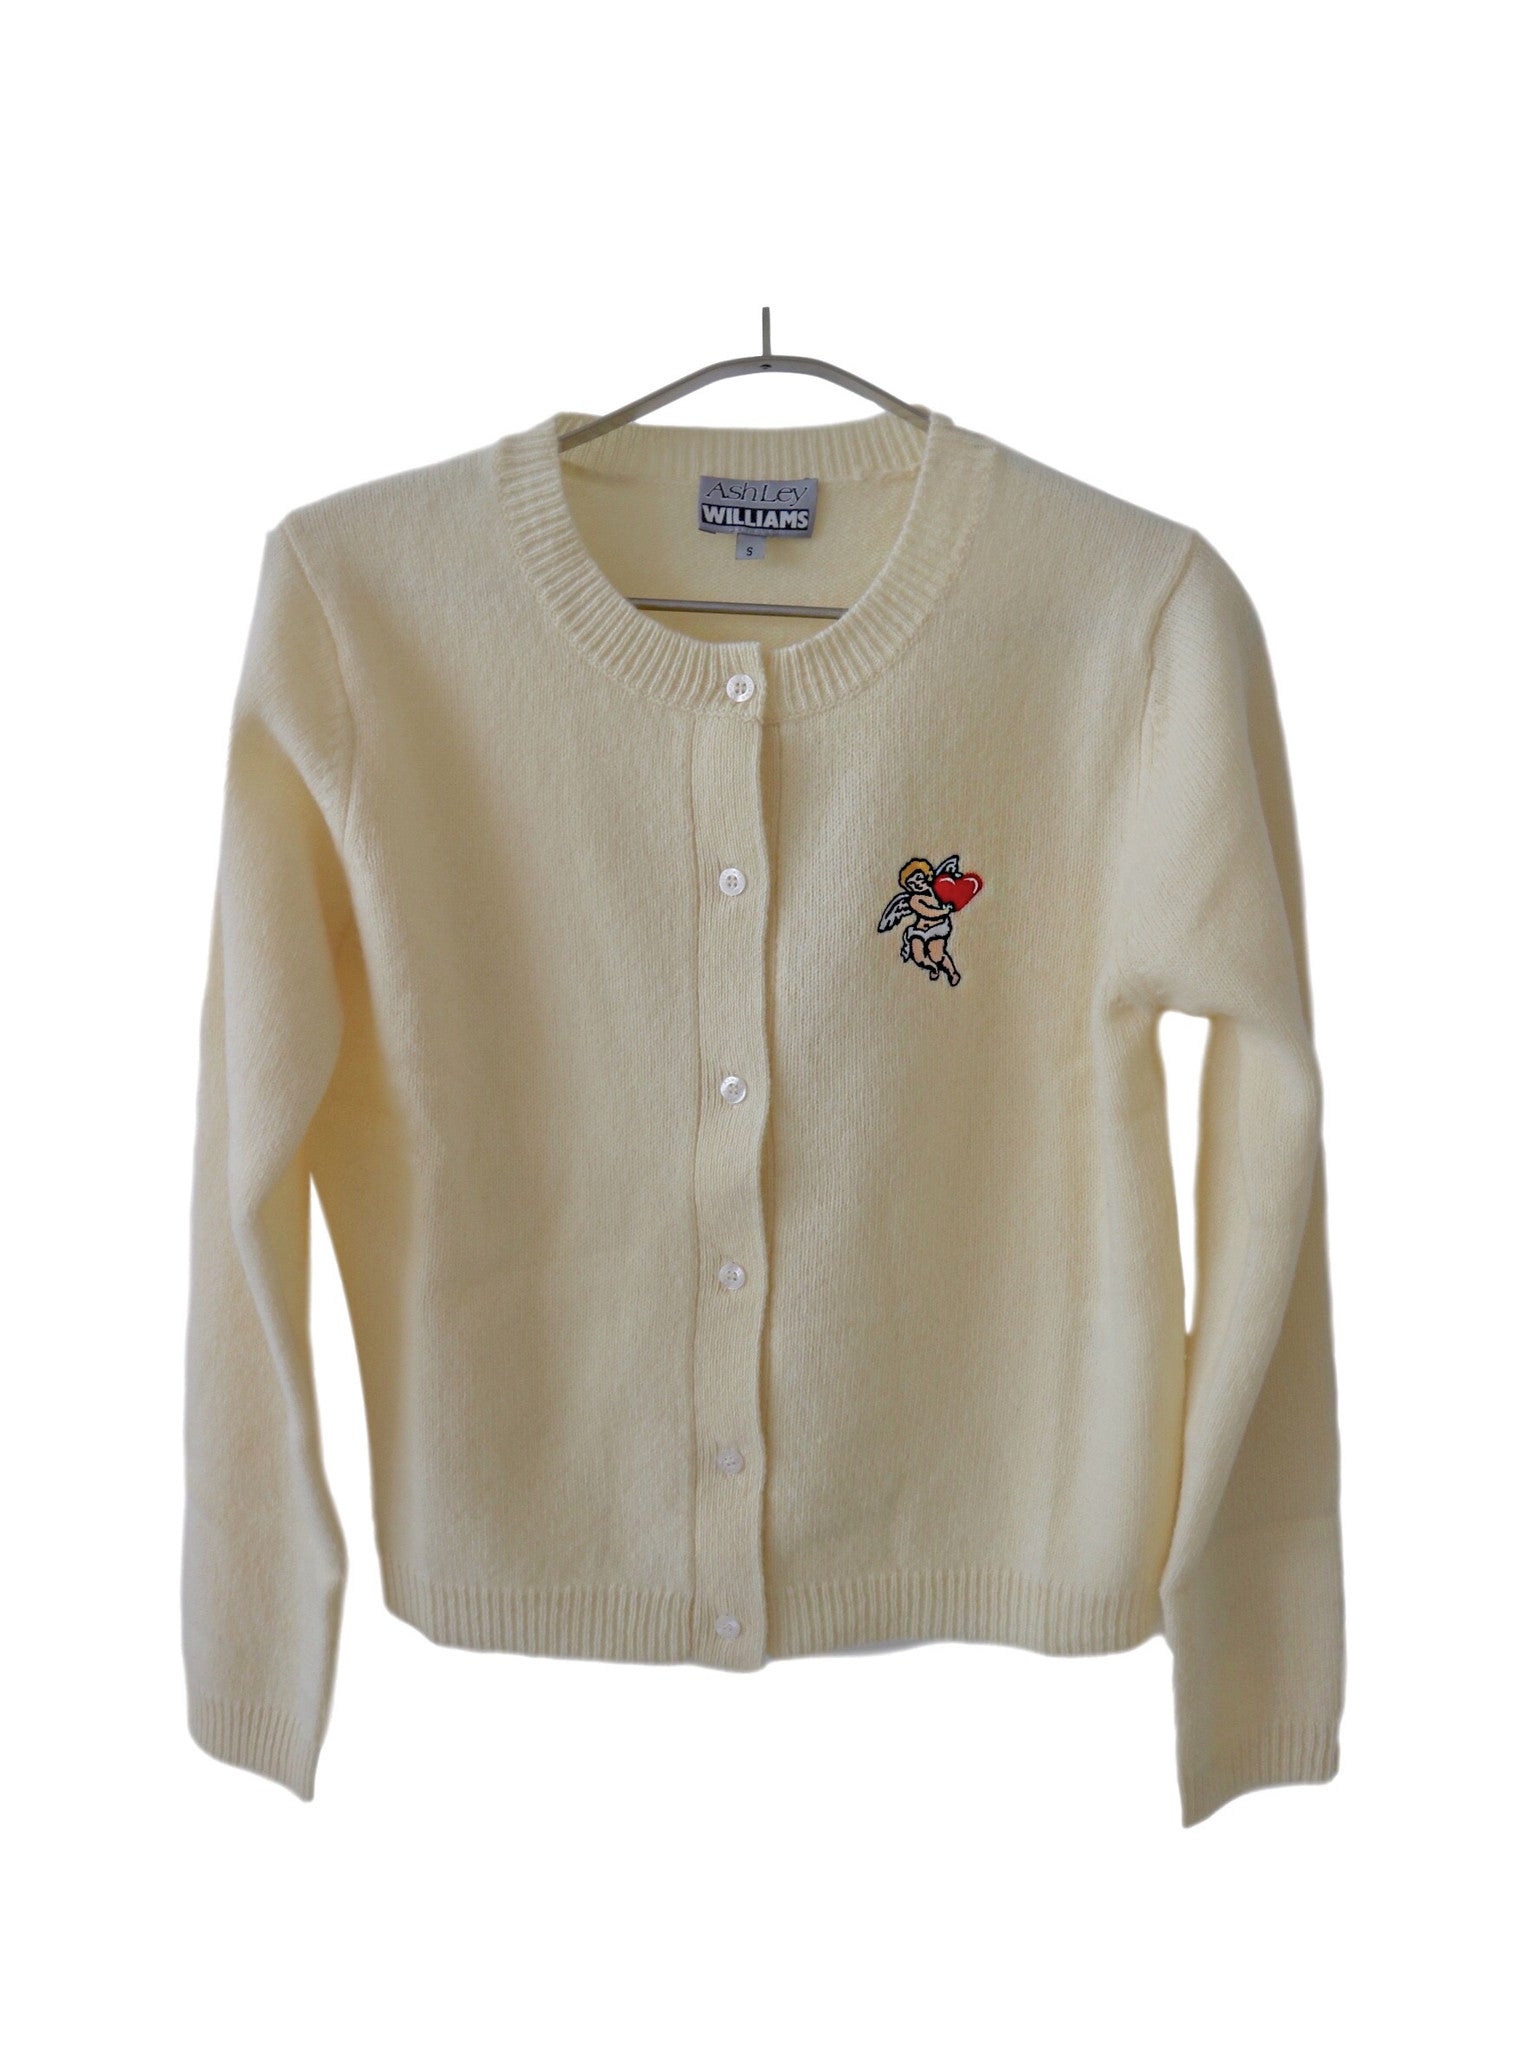 Ashley Williams - Embroidered Cherub Cardigan – House of Holthus